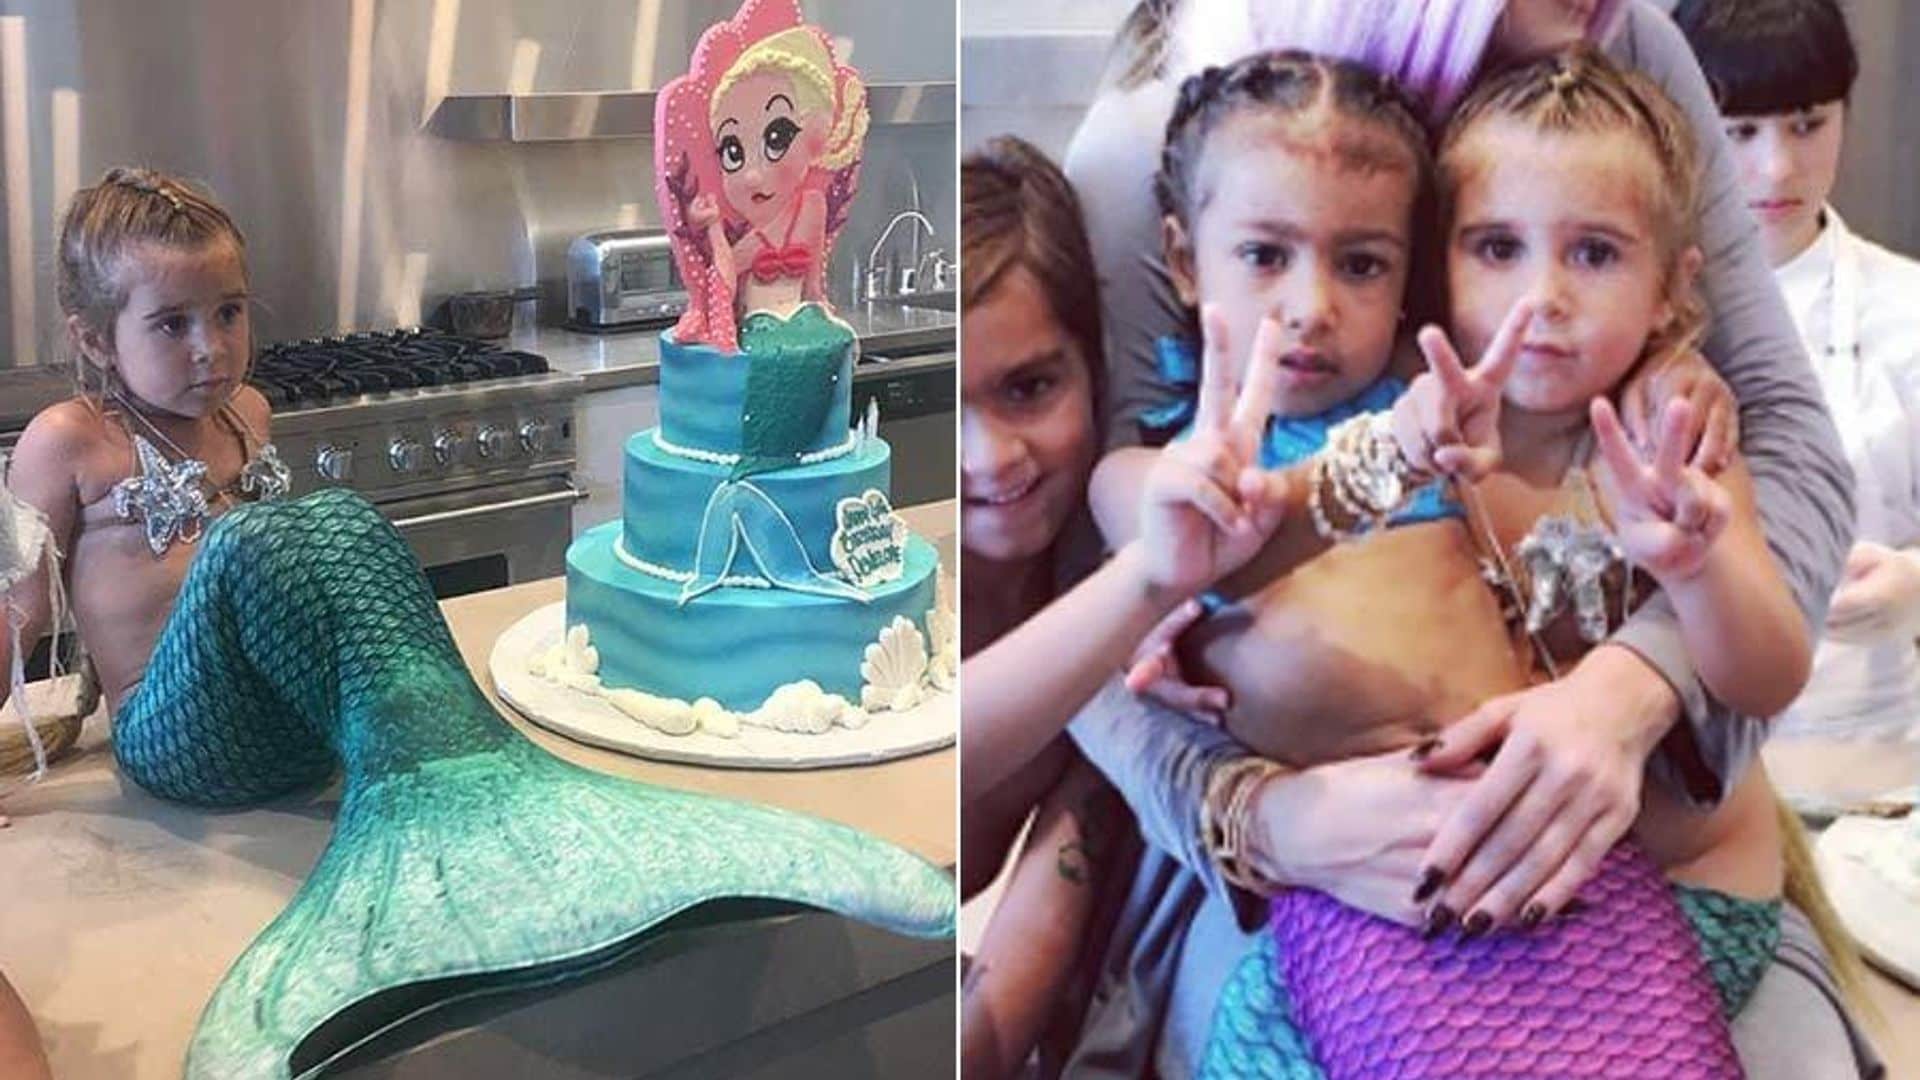 North West and Penelope Disick celebrate their birthdays with a joint mermaid party